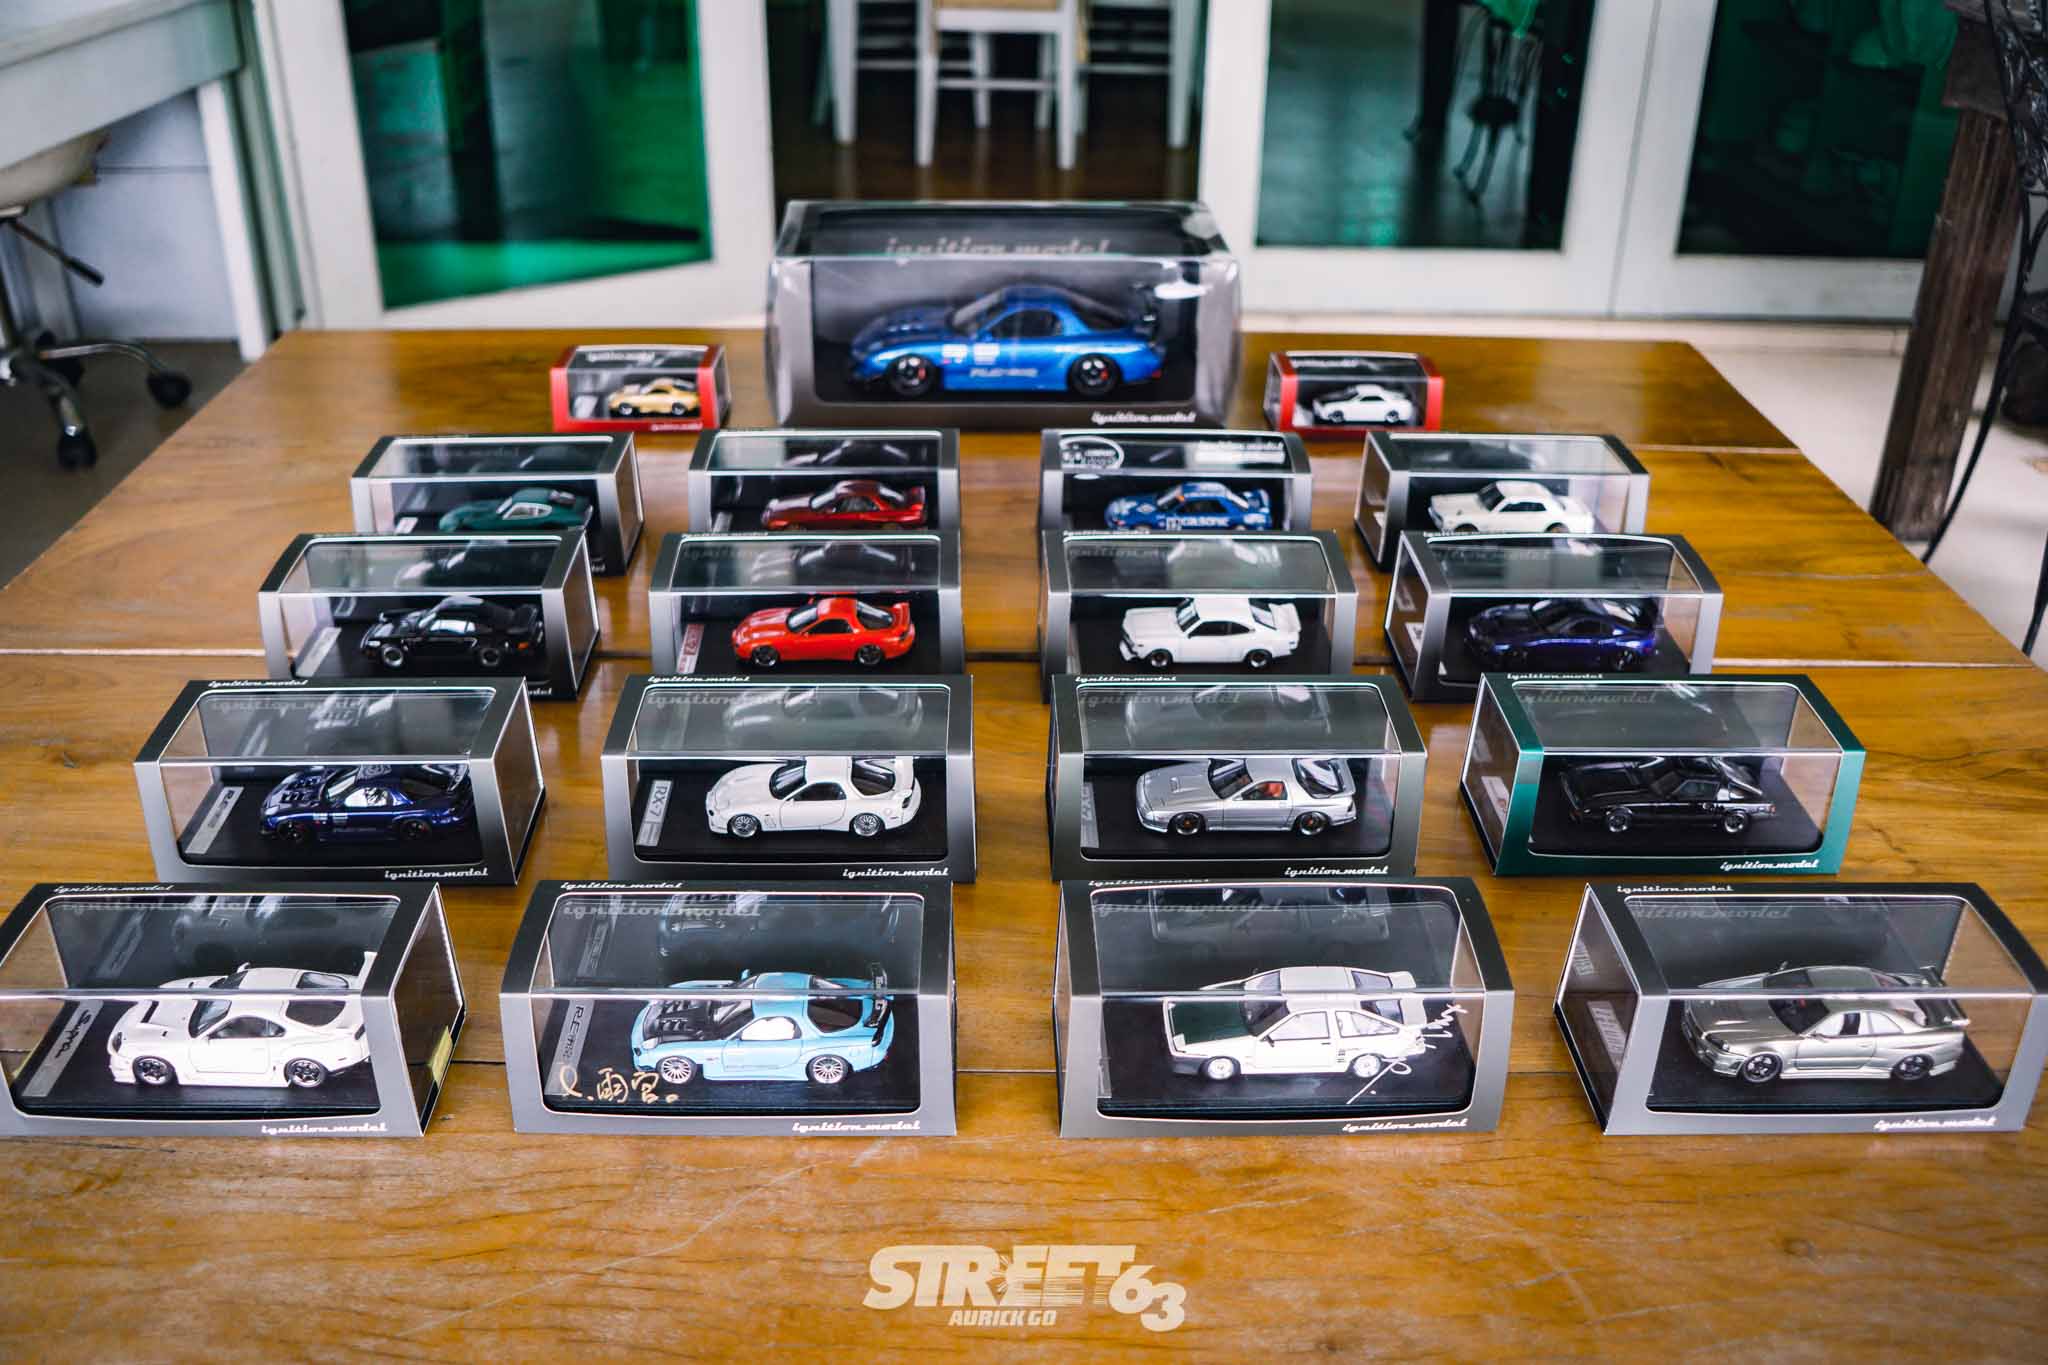 Street63 - Mini63: The Street63 Diecast Collection